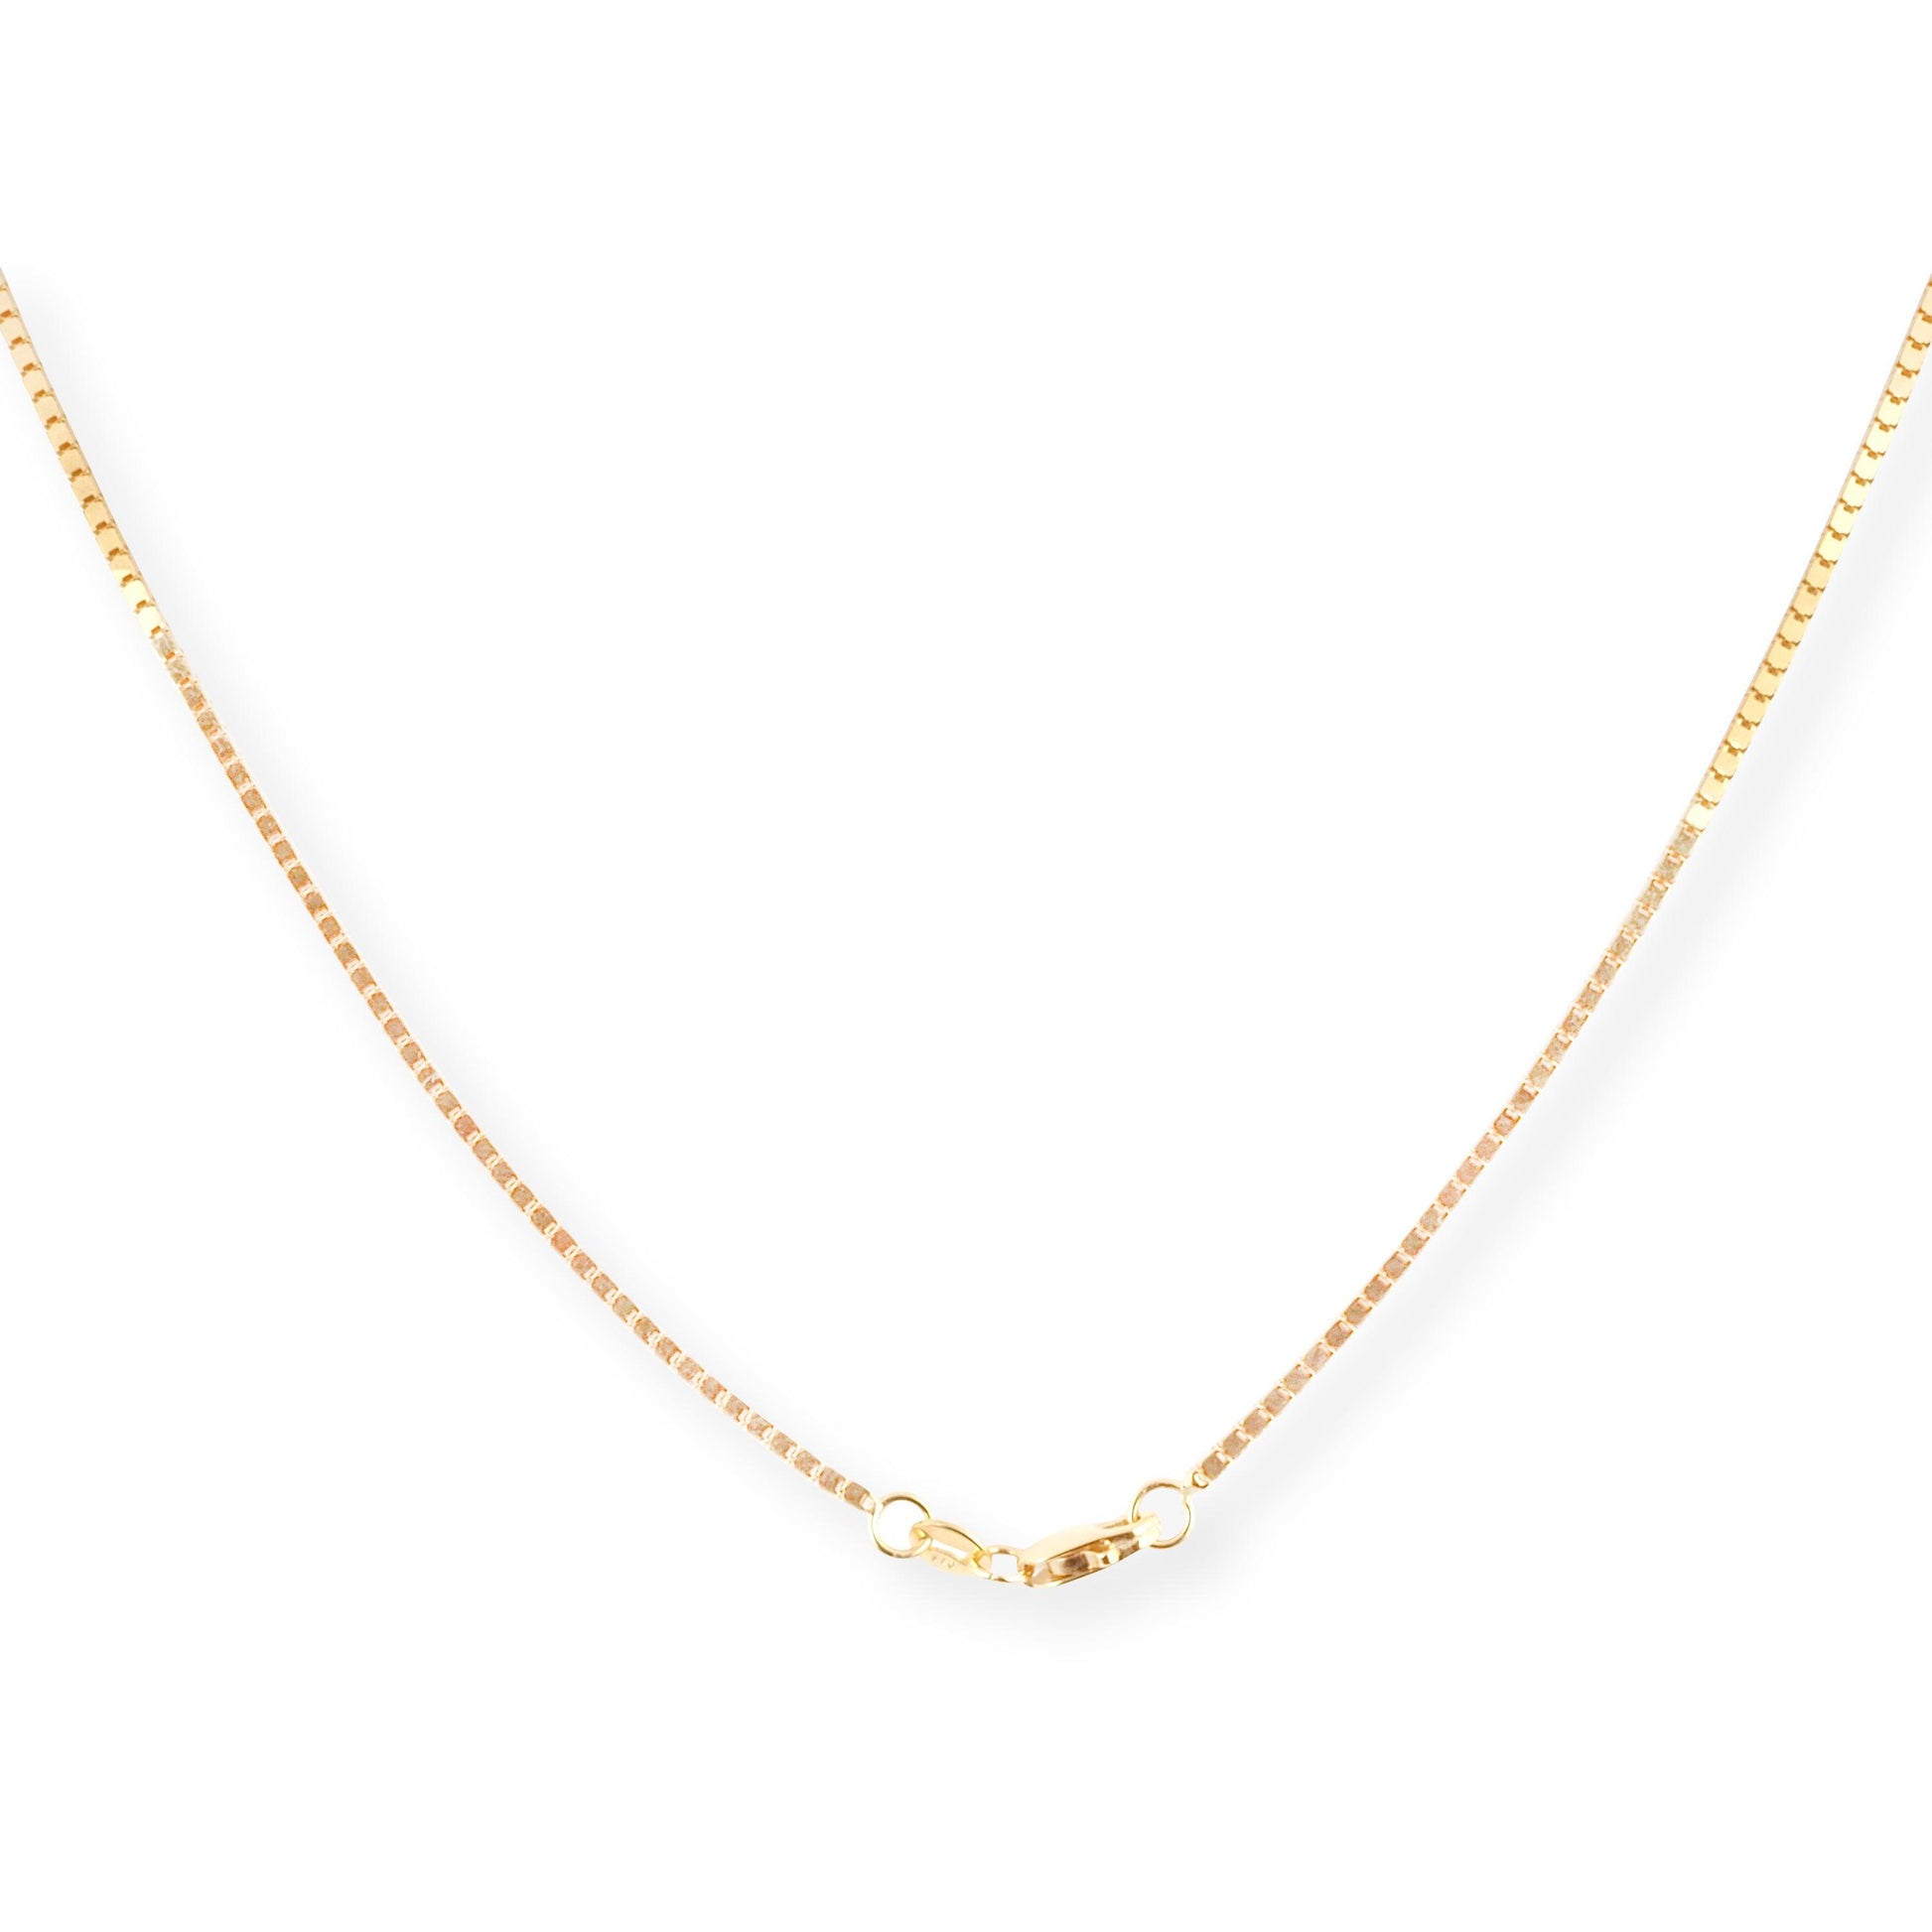 22ct Gold Box Chain with Lobster Clasp C-3824 - Minar Jewellers